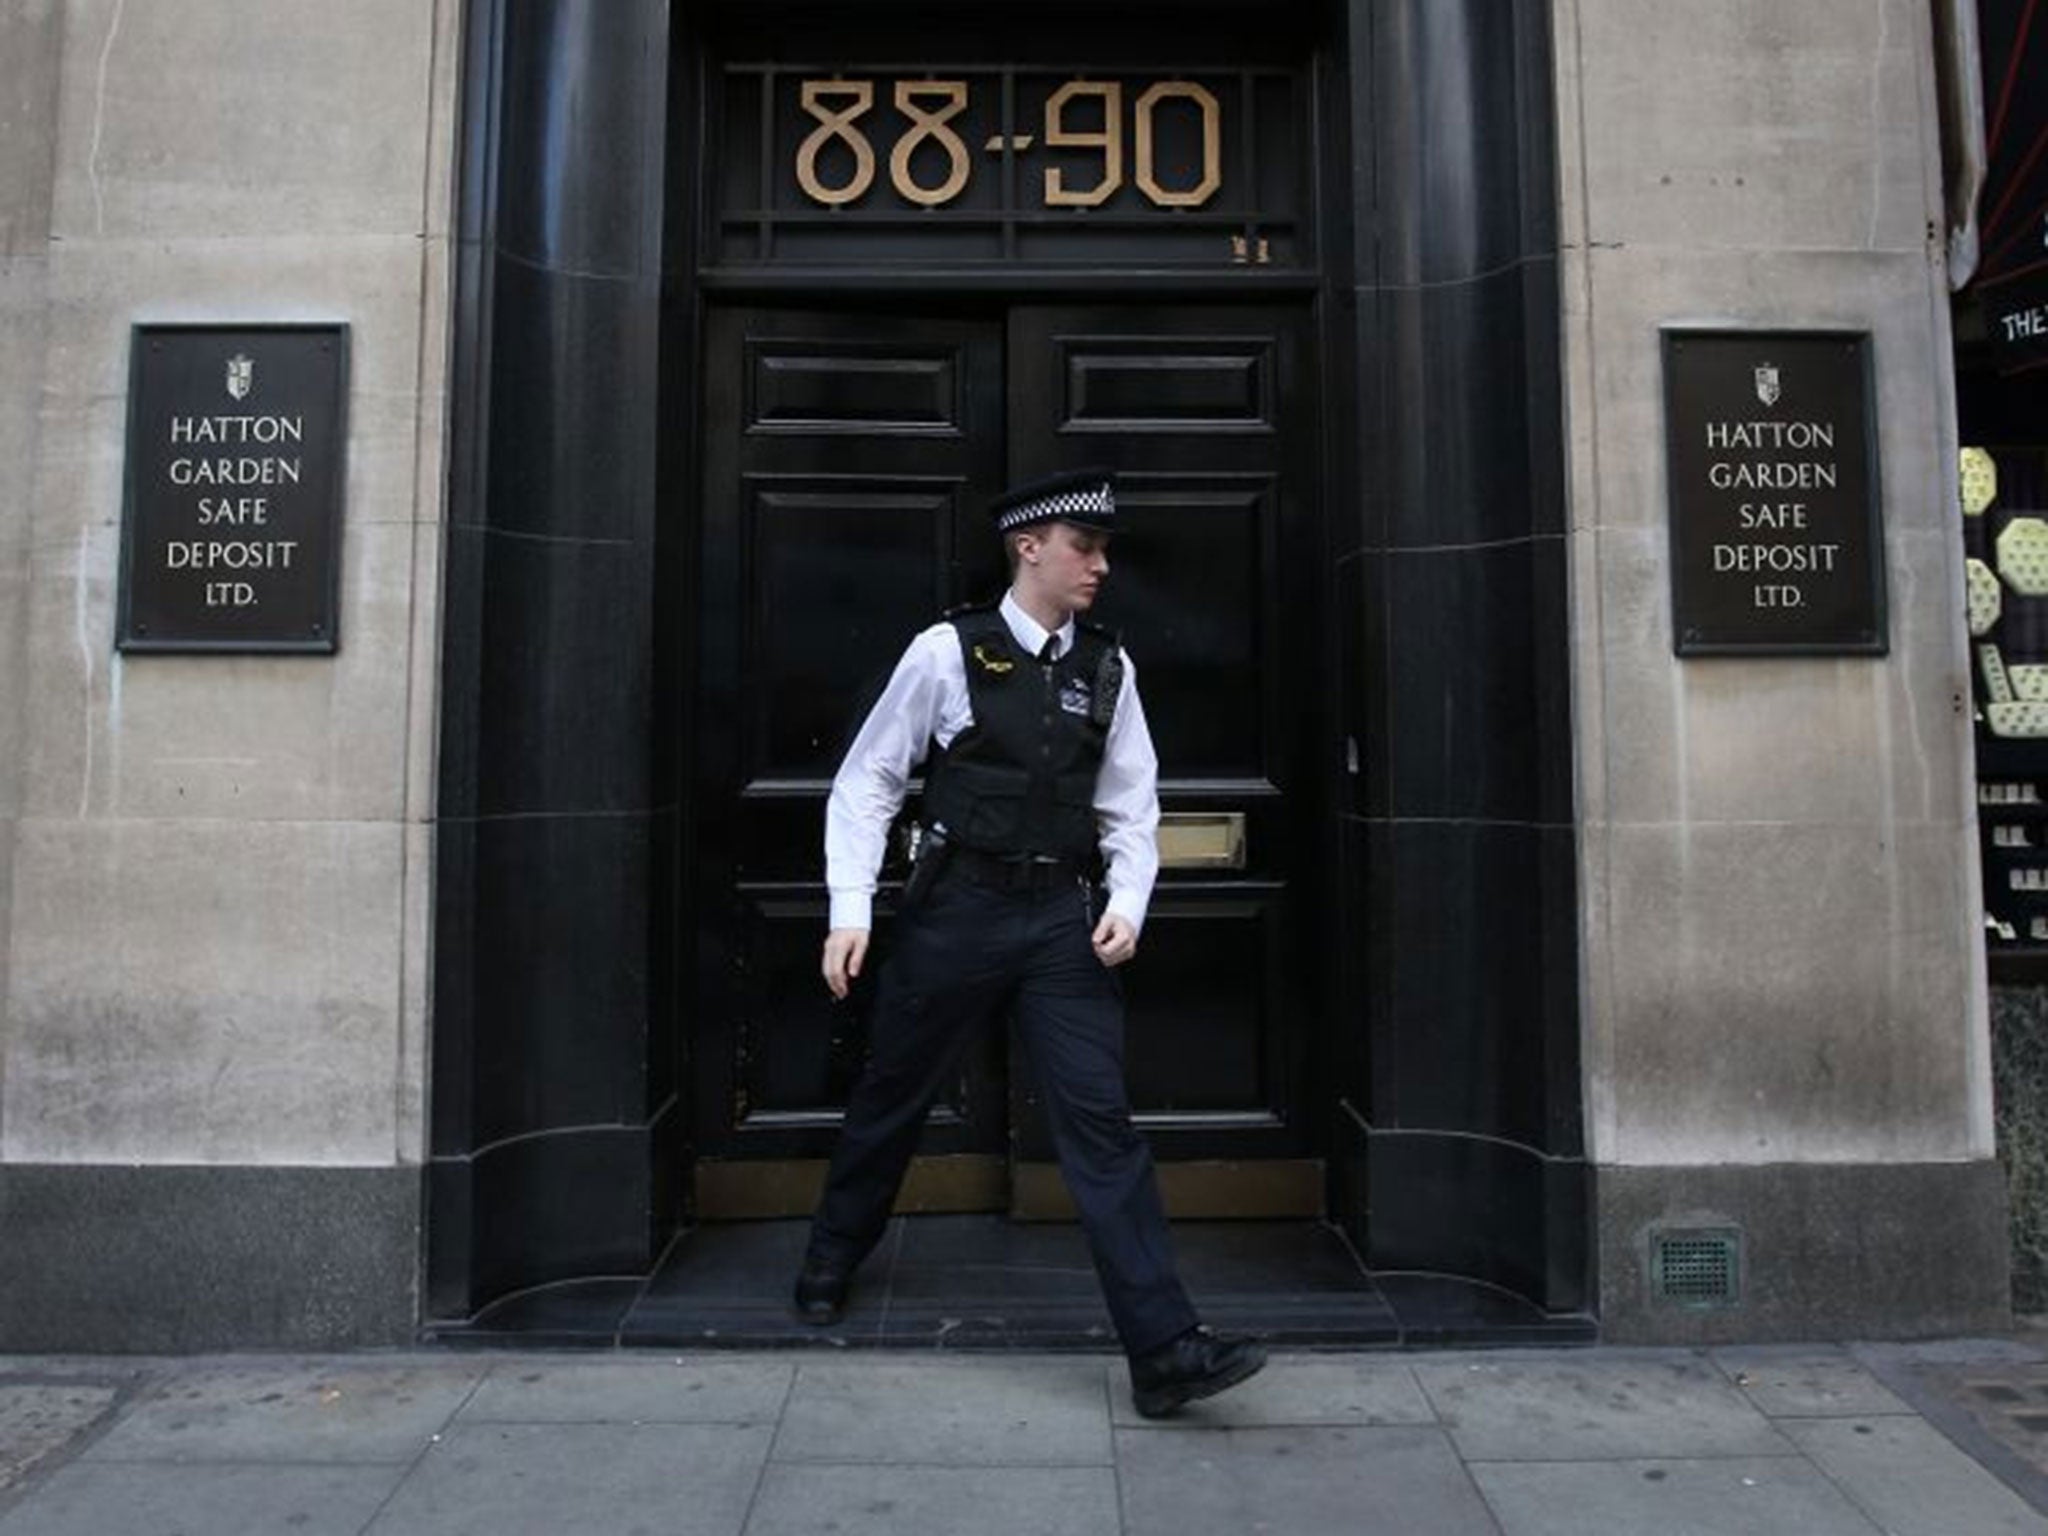 A policeman emerges from a Hatton Garden safe deposit centre on April 7, 2015 in London, England.